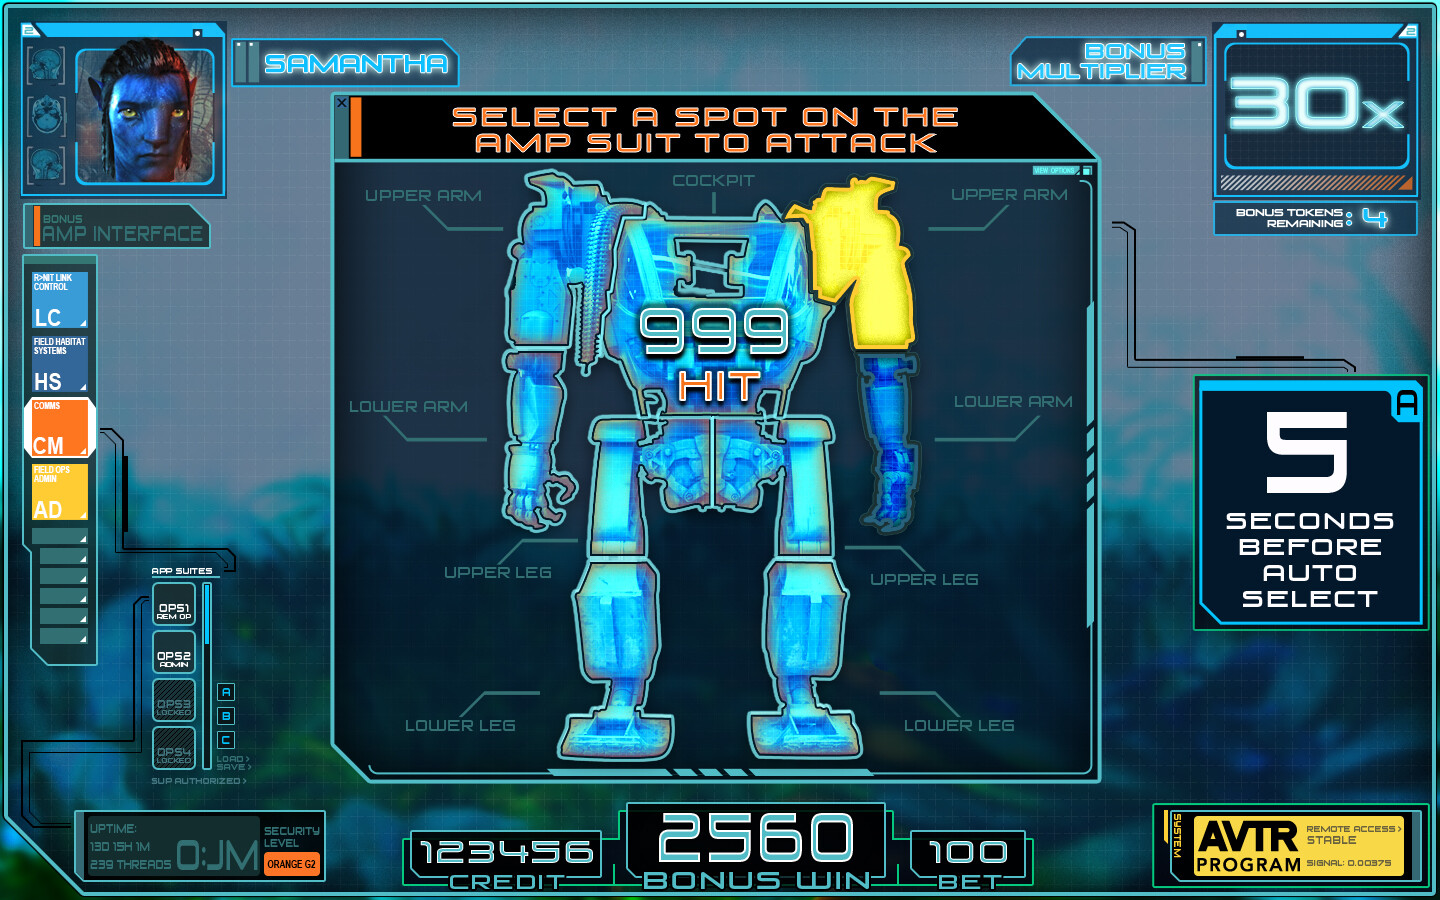 Suit screen. Players picked an area of the suit to attack. And then reveal an amount.